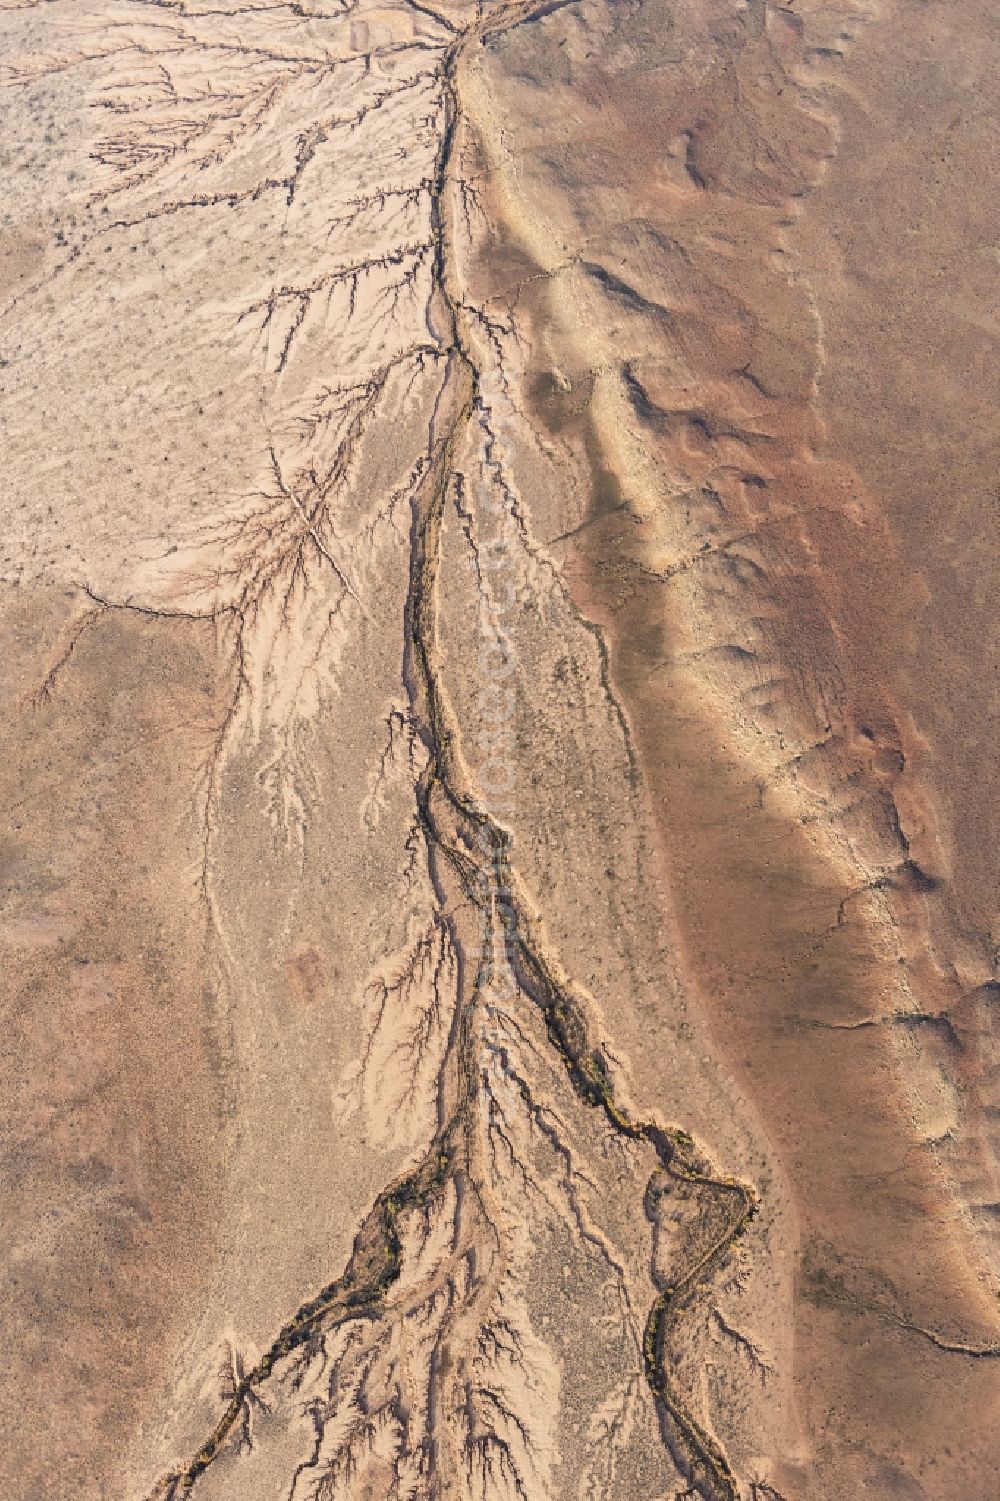 Hackberry from above - Landscape of the dry desert deformed by soil erosion and traces of water in Hackberry in Arizona, United States of America